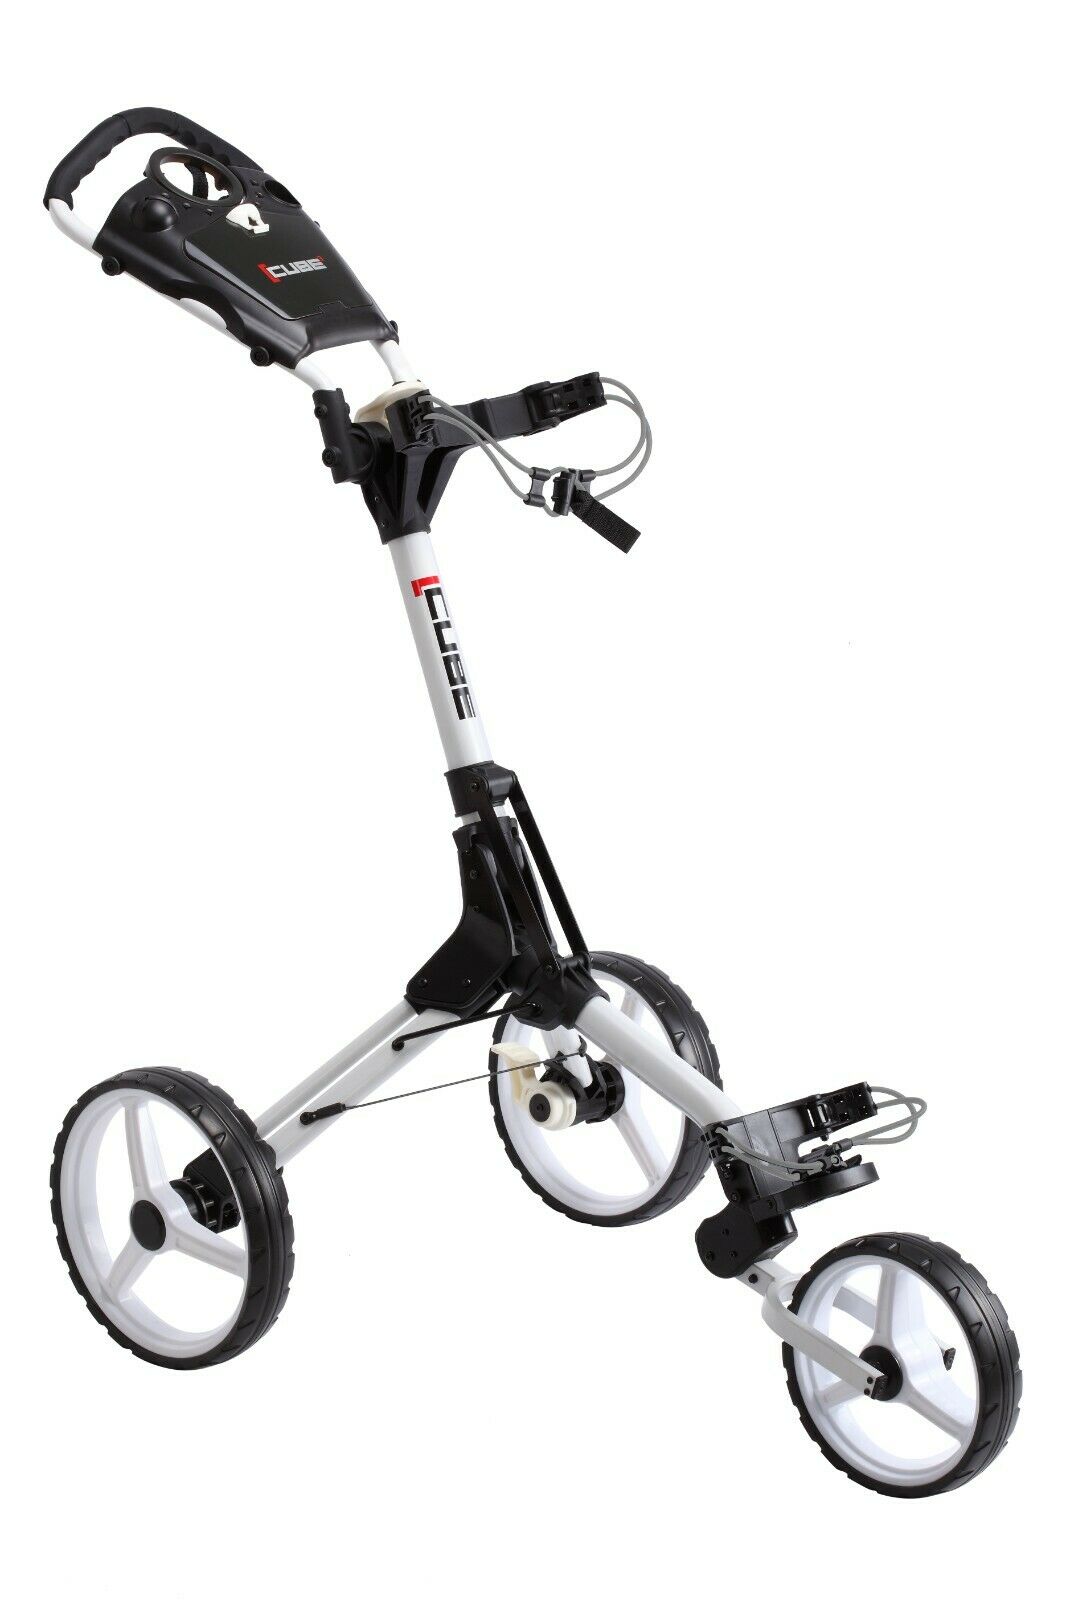 Cube 3 Wheel Compact Golf Push Cart with Umbrella Holder - The Golfing Eagles